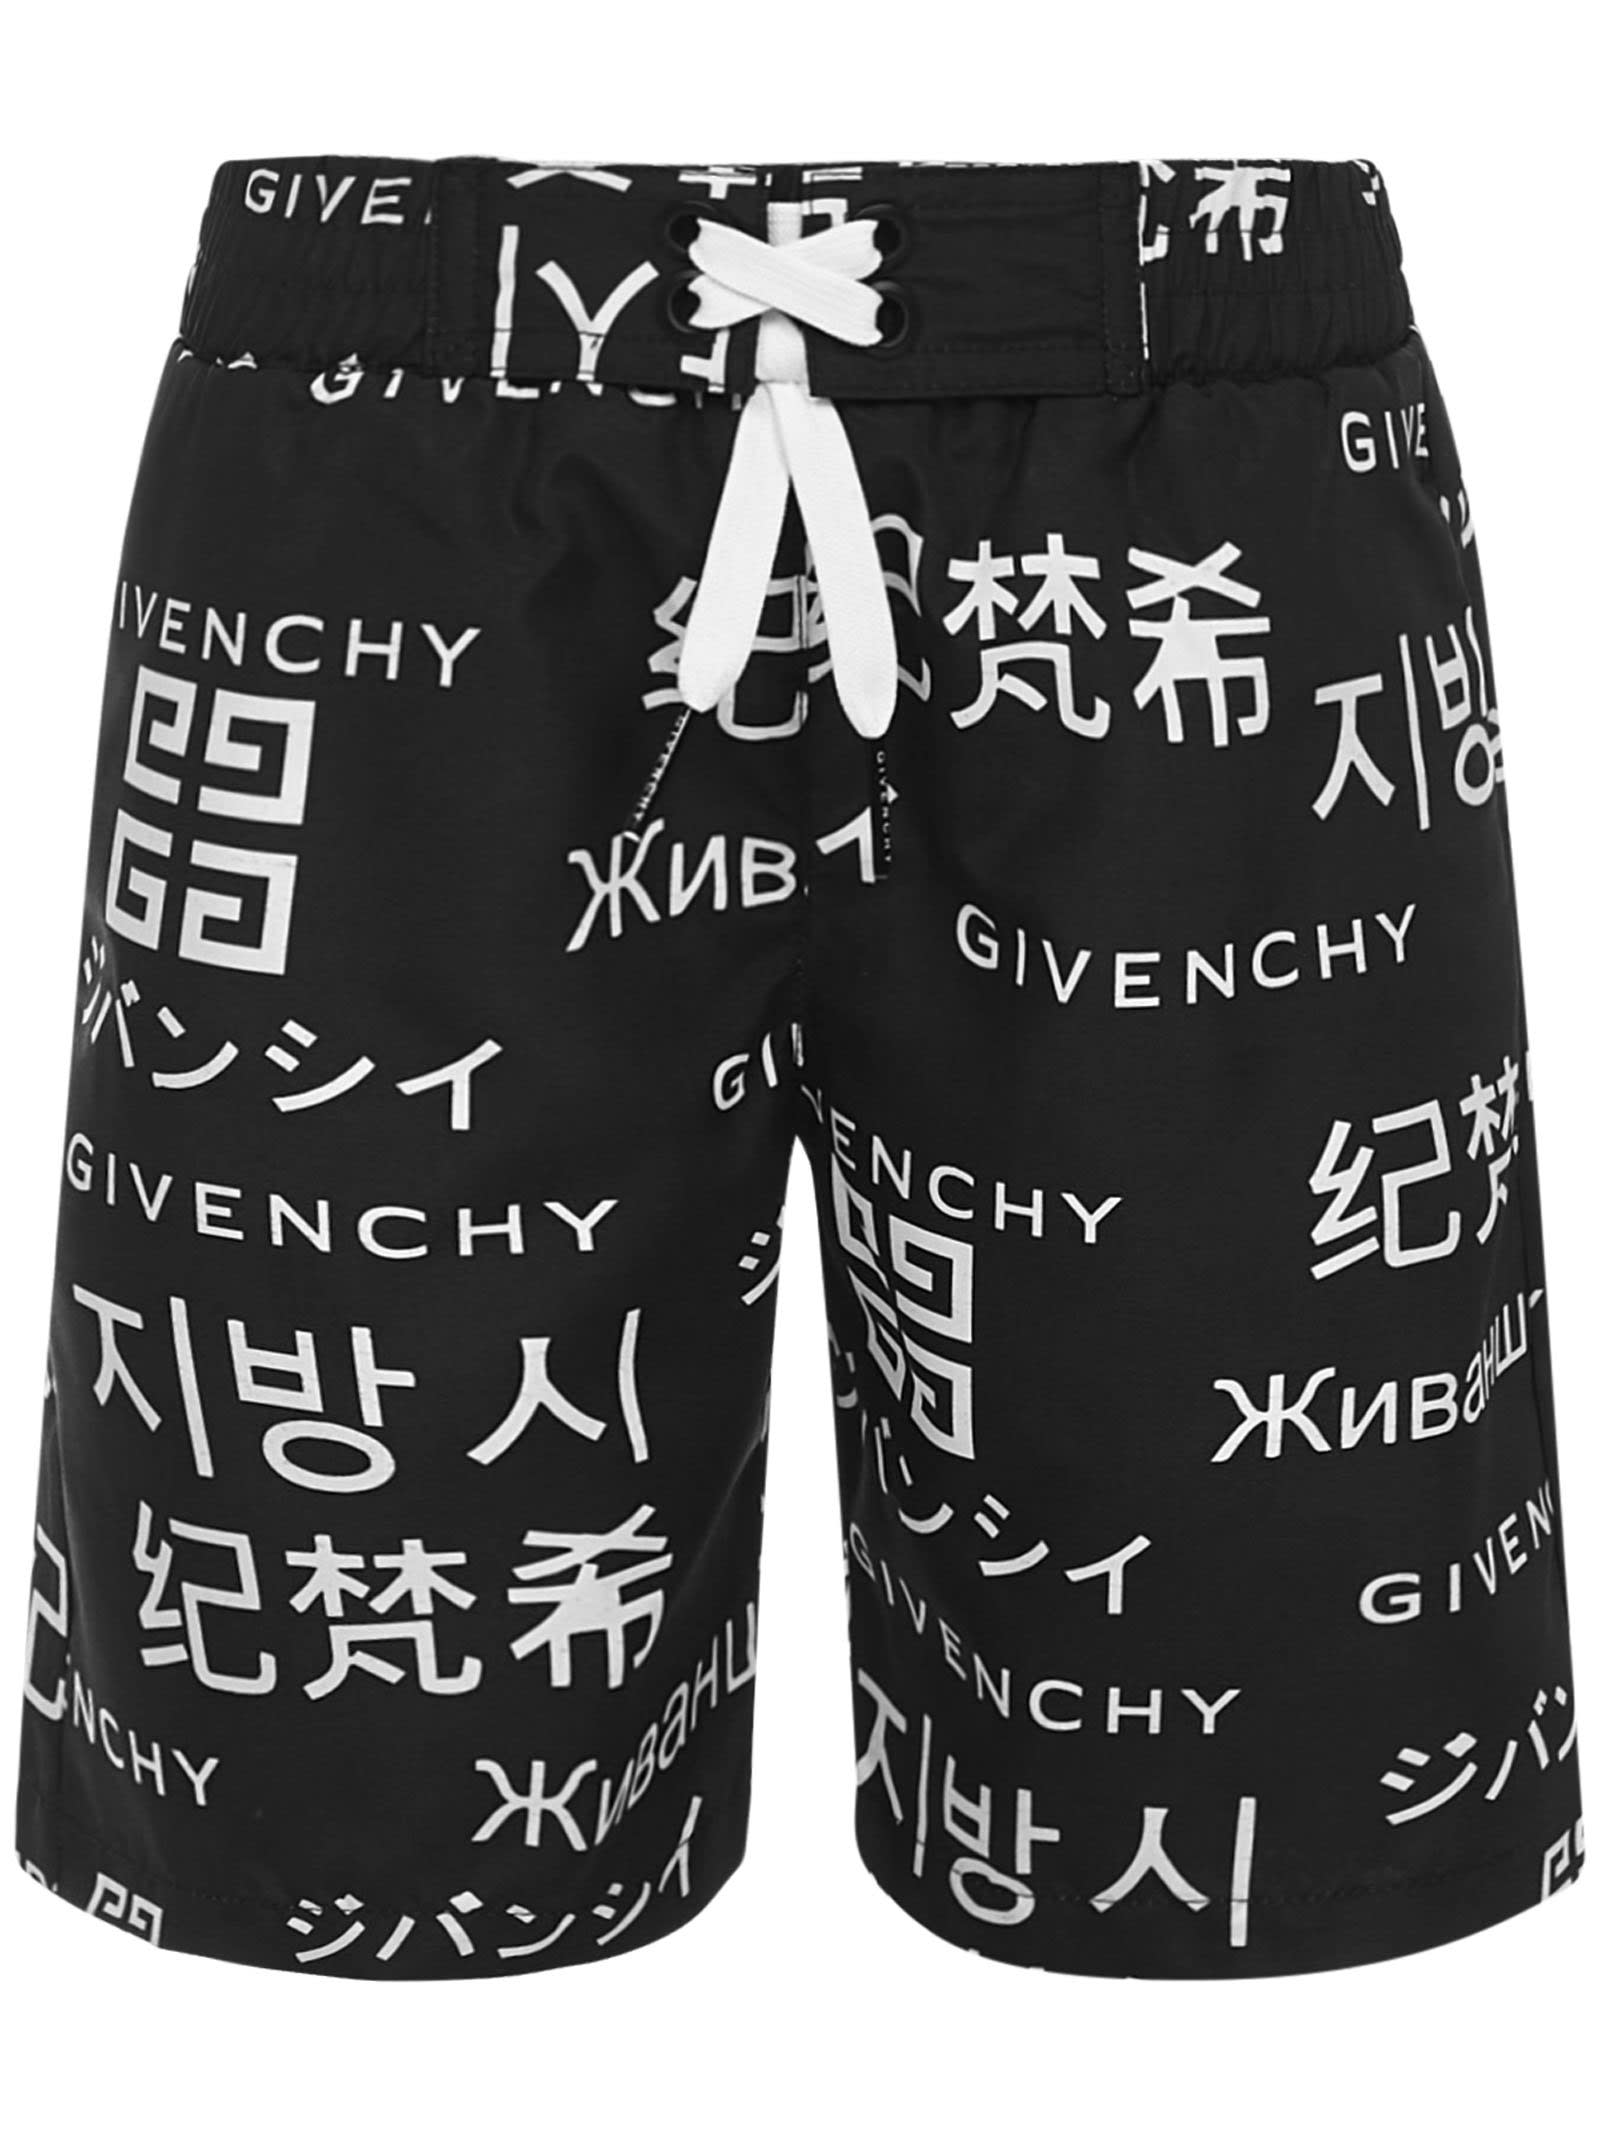 GIVENCHY KIDS SWIMSUIT,H20046 M41